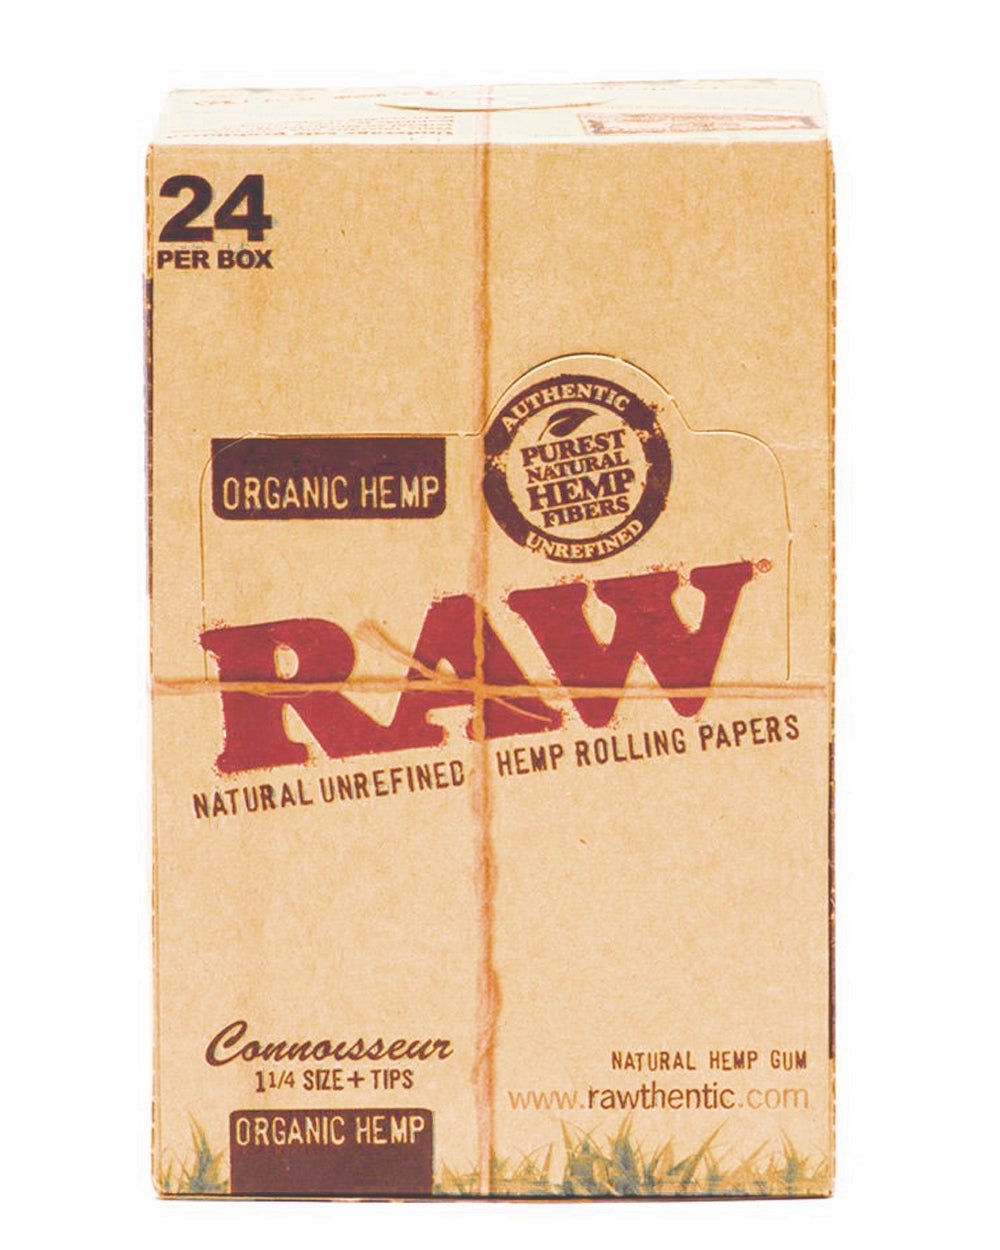 RAW | 'Retail Display' Connoisseur 1 1/4 Size Rolling Papers + Tips | 83mm - Organic Hemp - 24 Count - 3